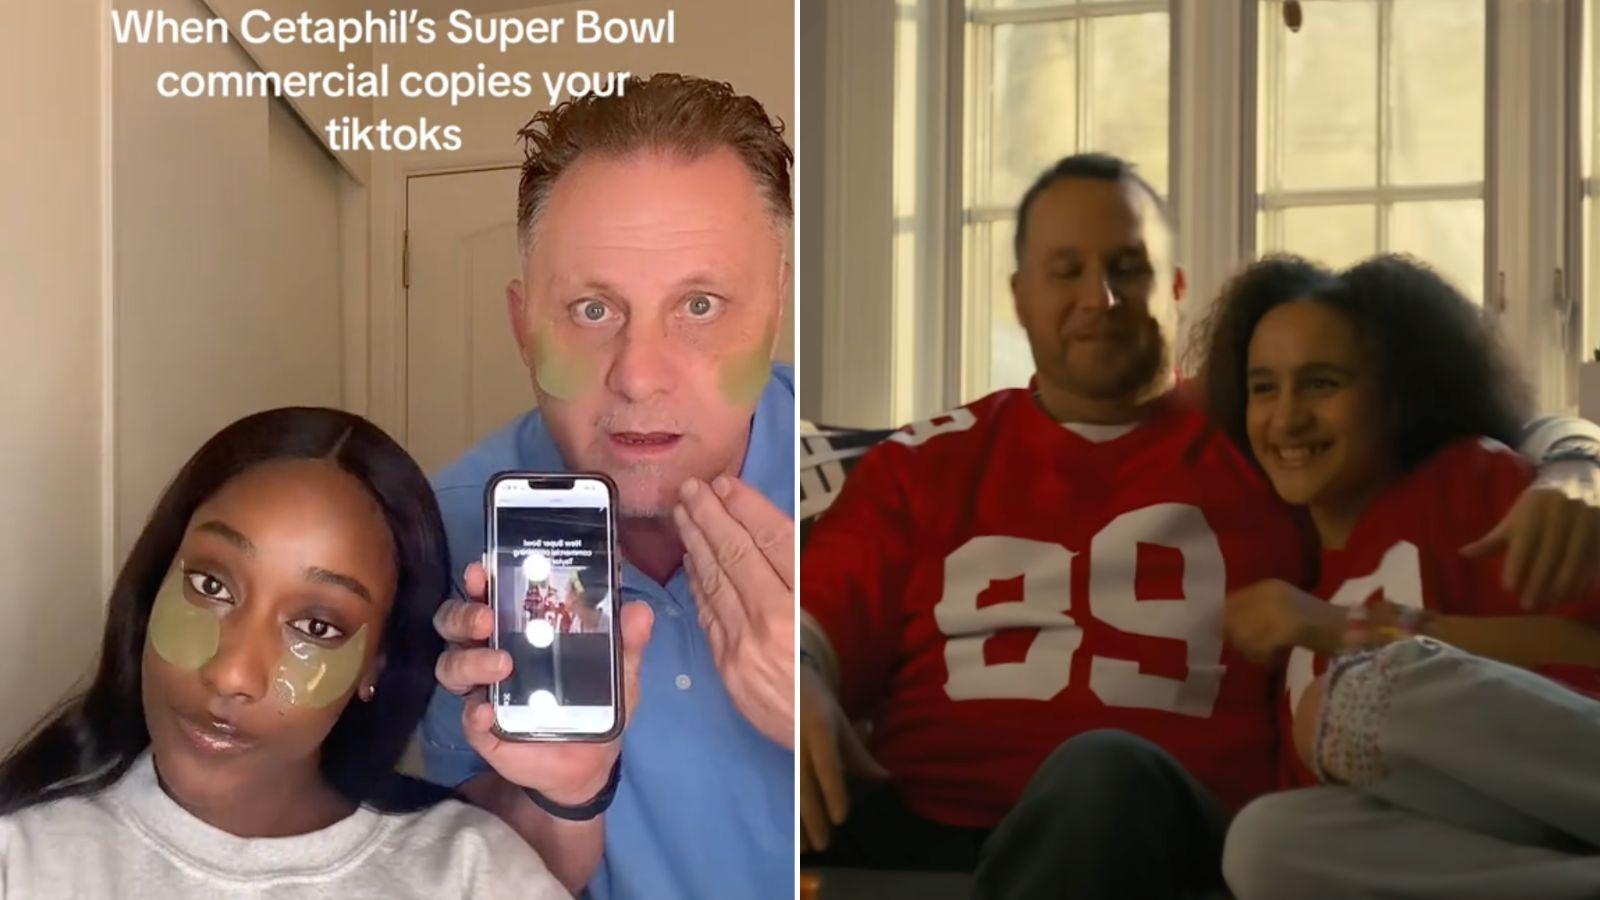 A father-daughter duo accuses Cetaphil of stealing video for super bowl ad